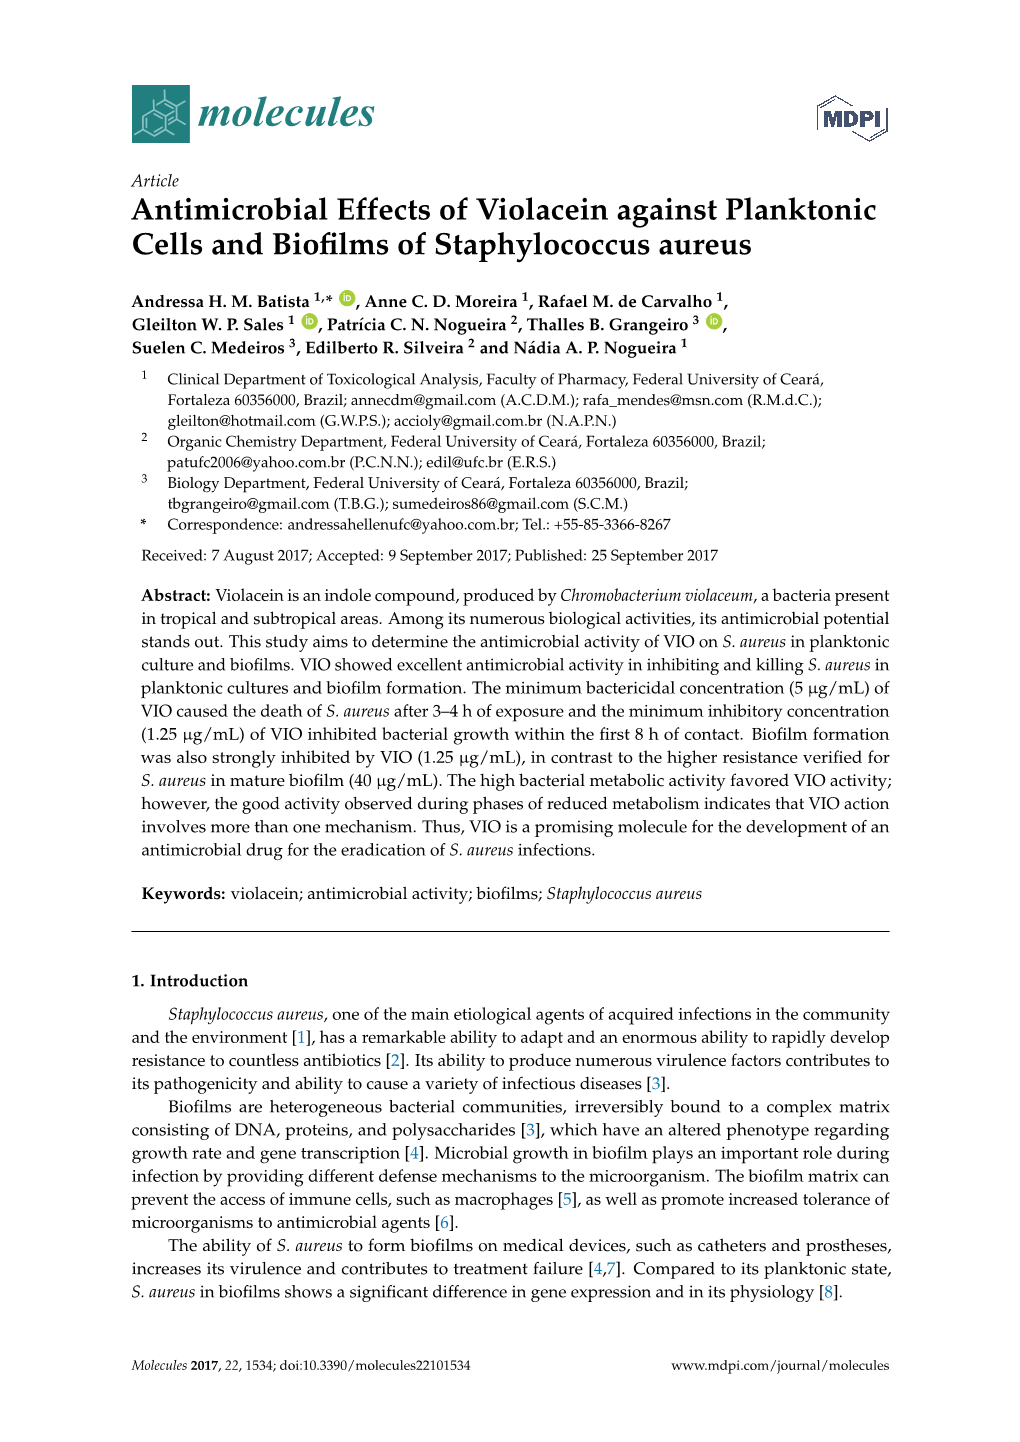 Antimicrobial Effects of Violacein Against Planktonic Cells and Bioﬁlms of Staphylococcus Aureus